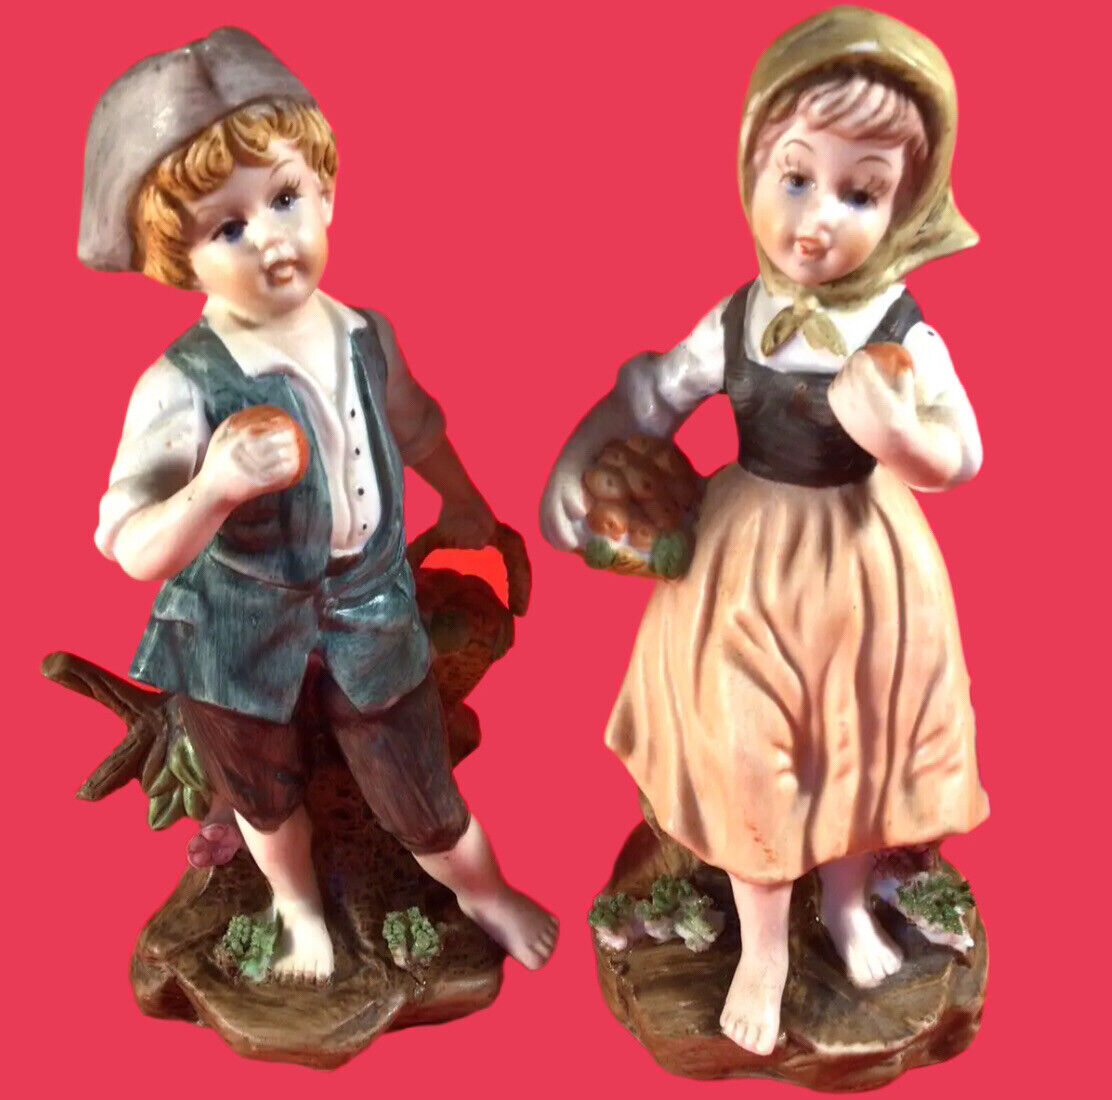 PRICE IMPORT CHILDREN FIGURINES PICKING APPLES VINTAGE HAND PAINTED LOT OF 2